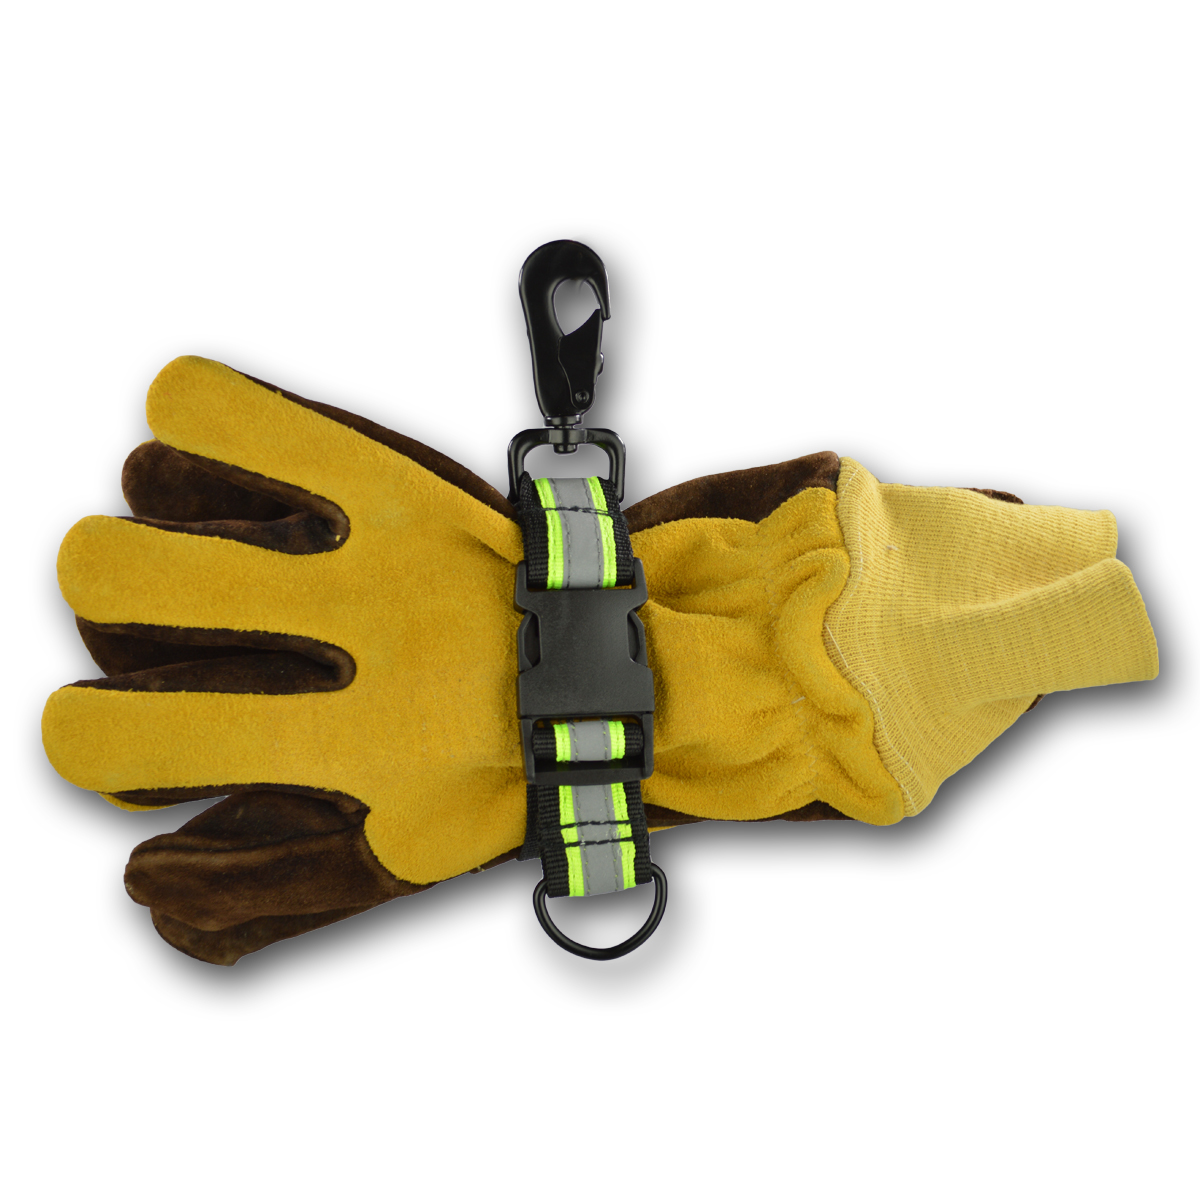 Firefighter Turnout Gear Glove Strap Glove Holder Trigger Claw Snap hook Yellow 